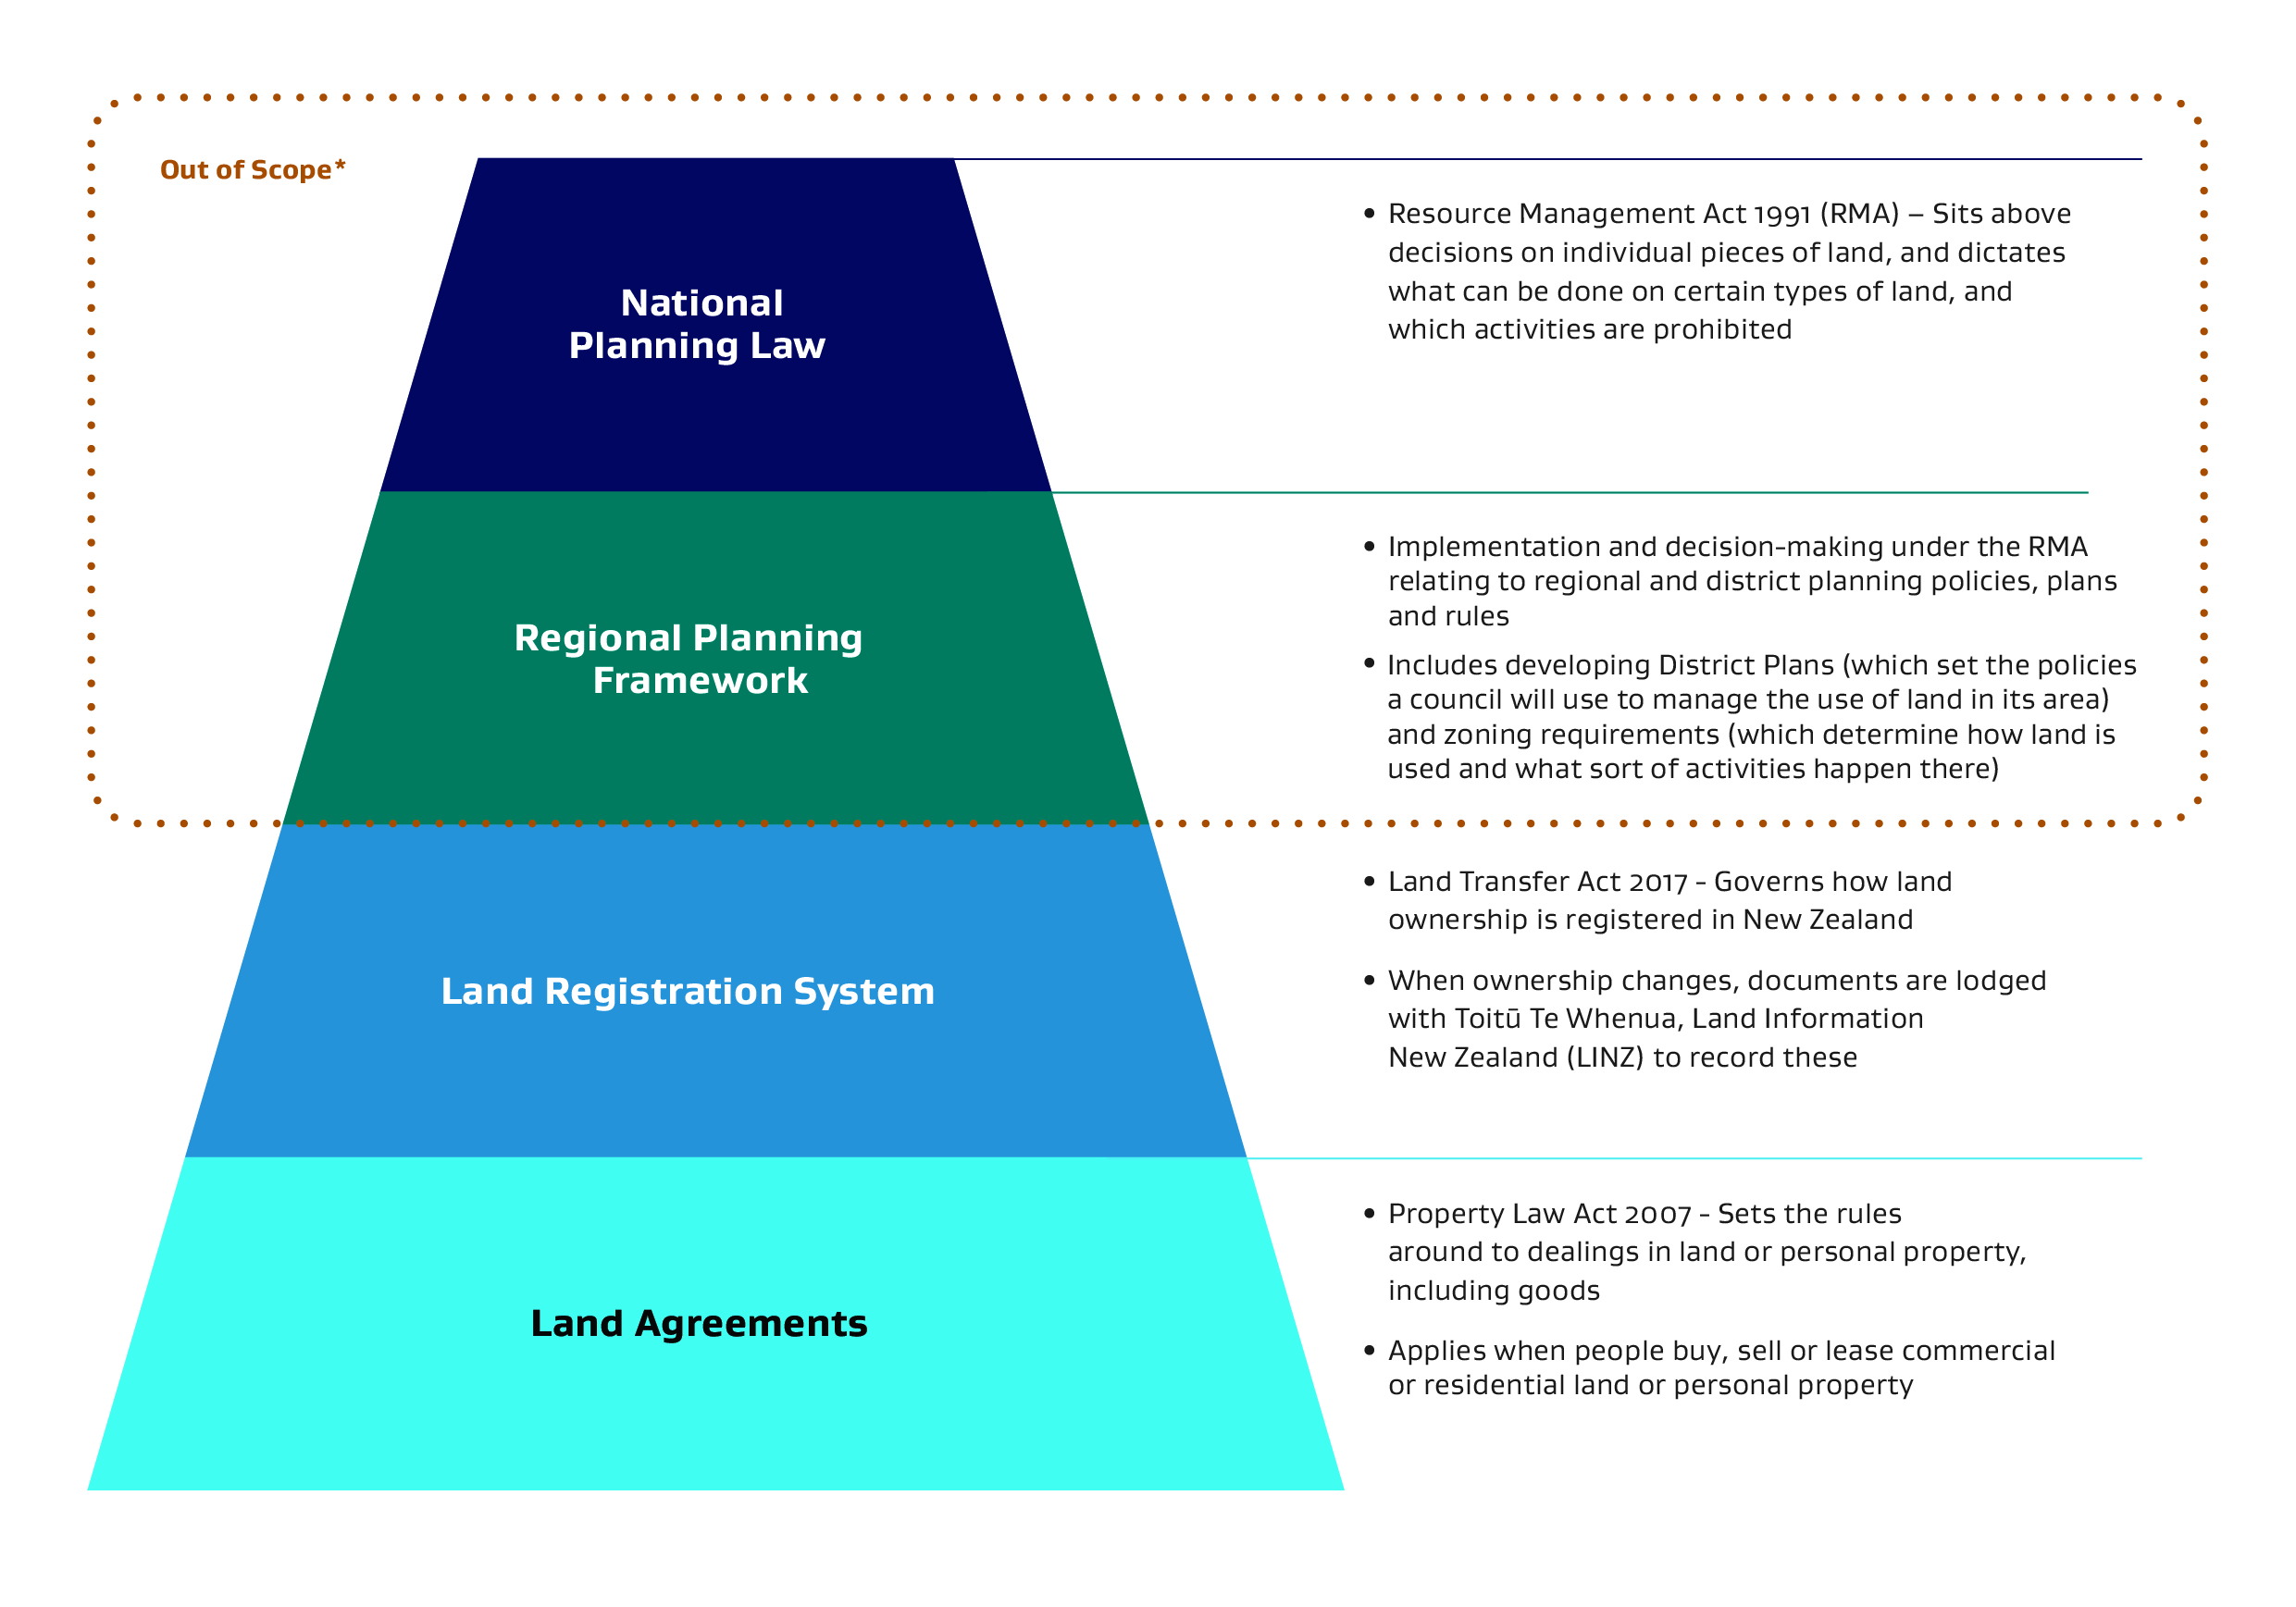 Anti competitive land agreements review graphic 1